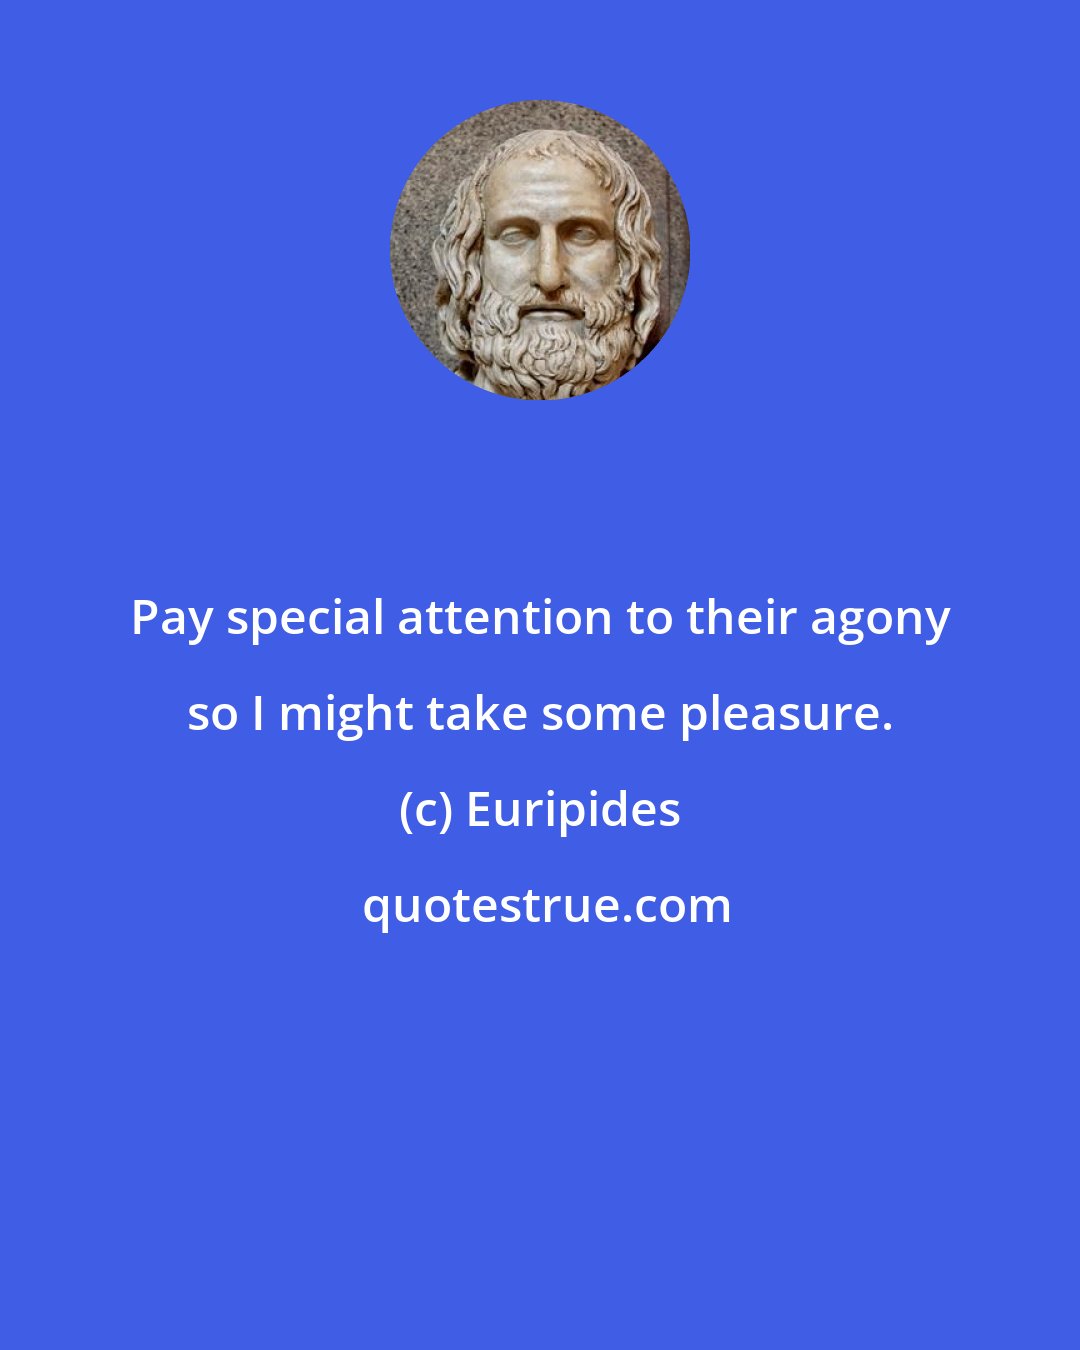 Euripides: Pay special attention to their agony so I might take some pleasure.